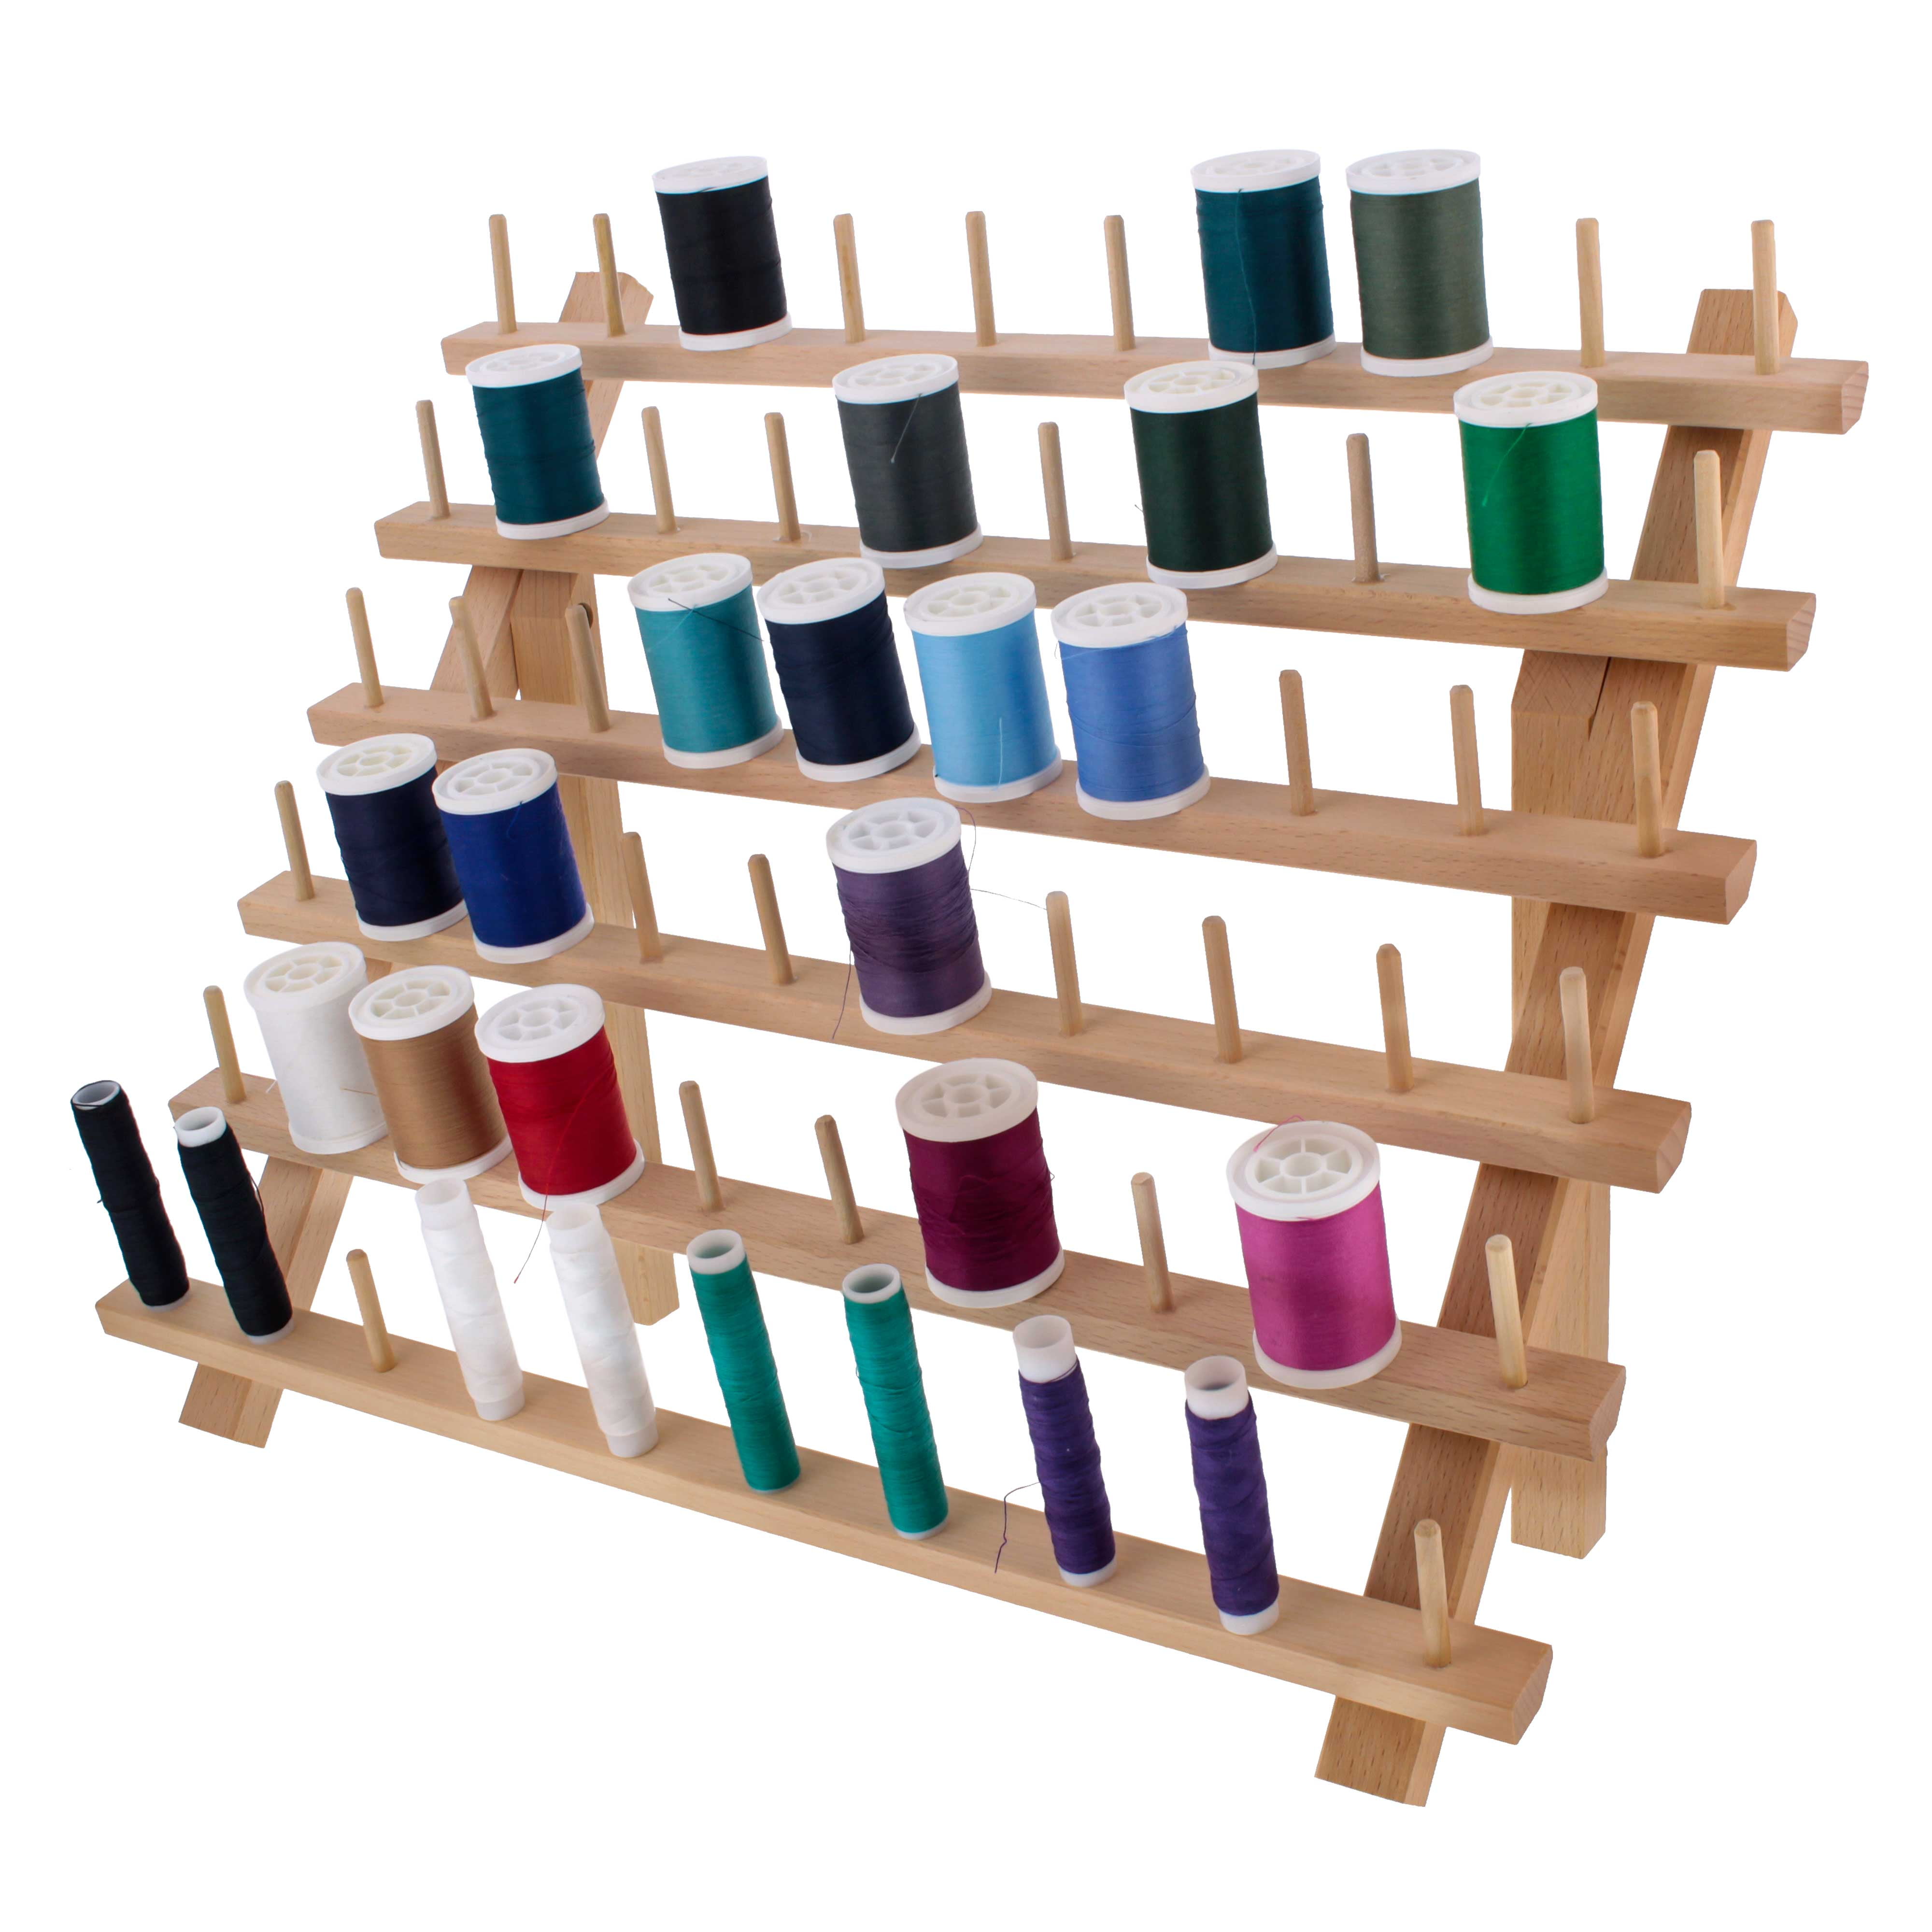 Braid Rack With 120 Spools Nature Wooden Thread Holder Sewing Embroidery  Thread Rack And Organizer Storage